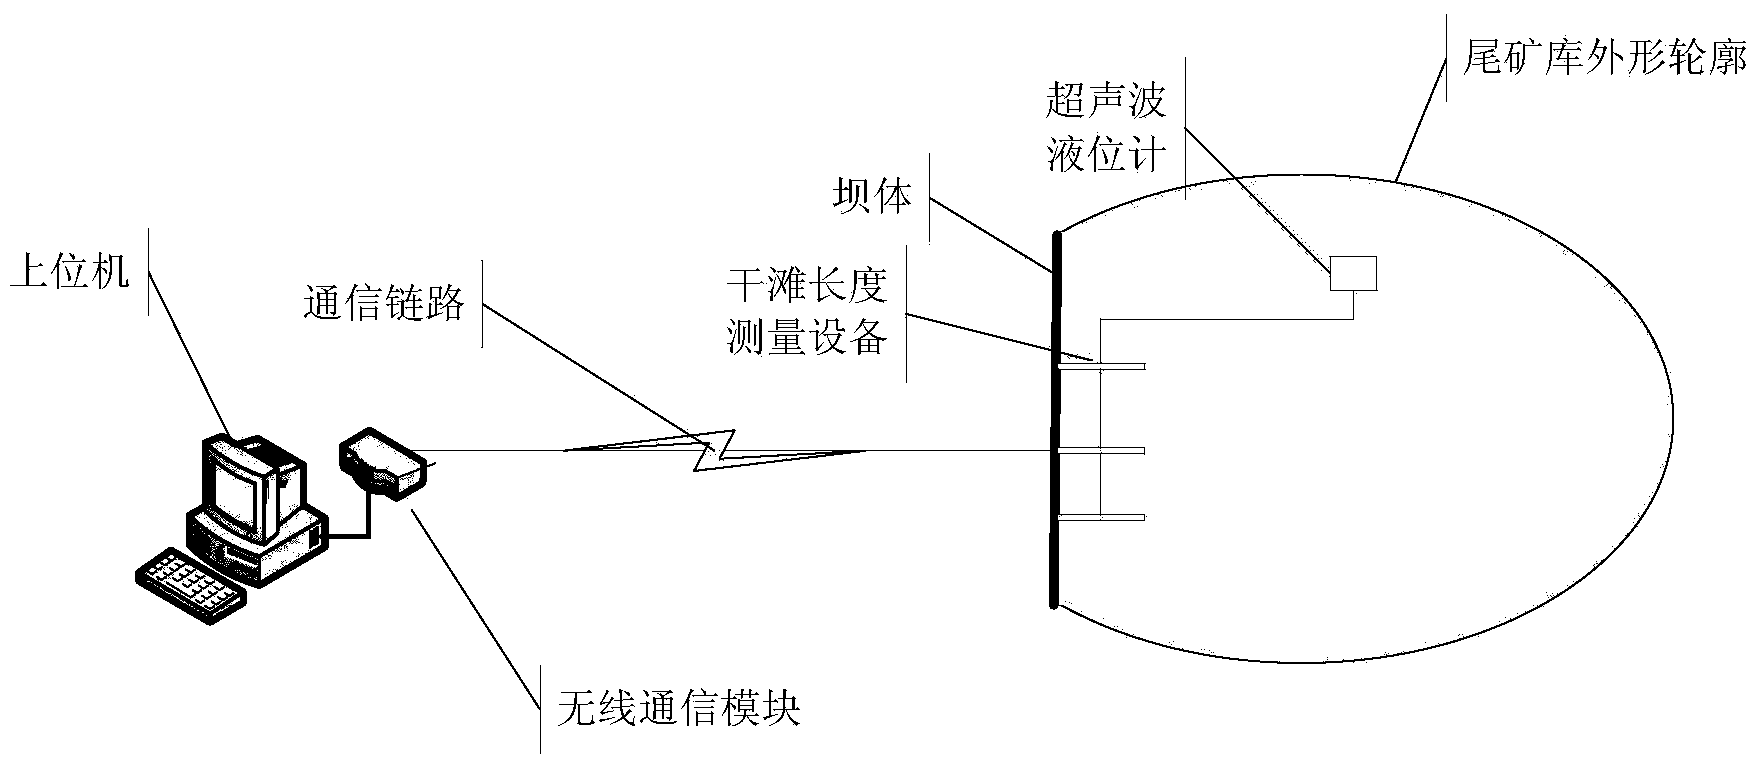 Tailings pond dry beach parameter monitoring system and method